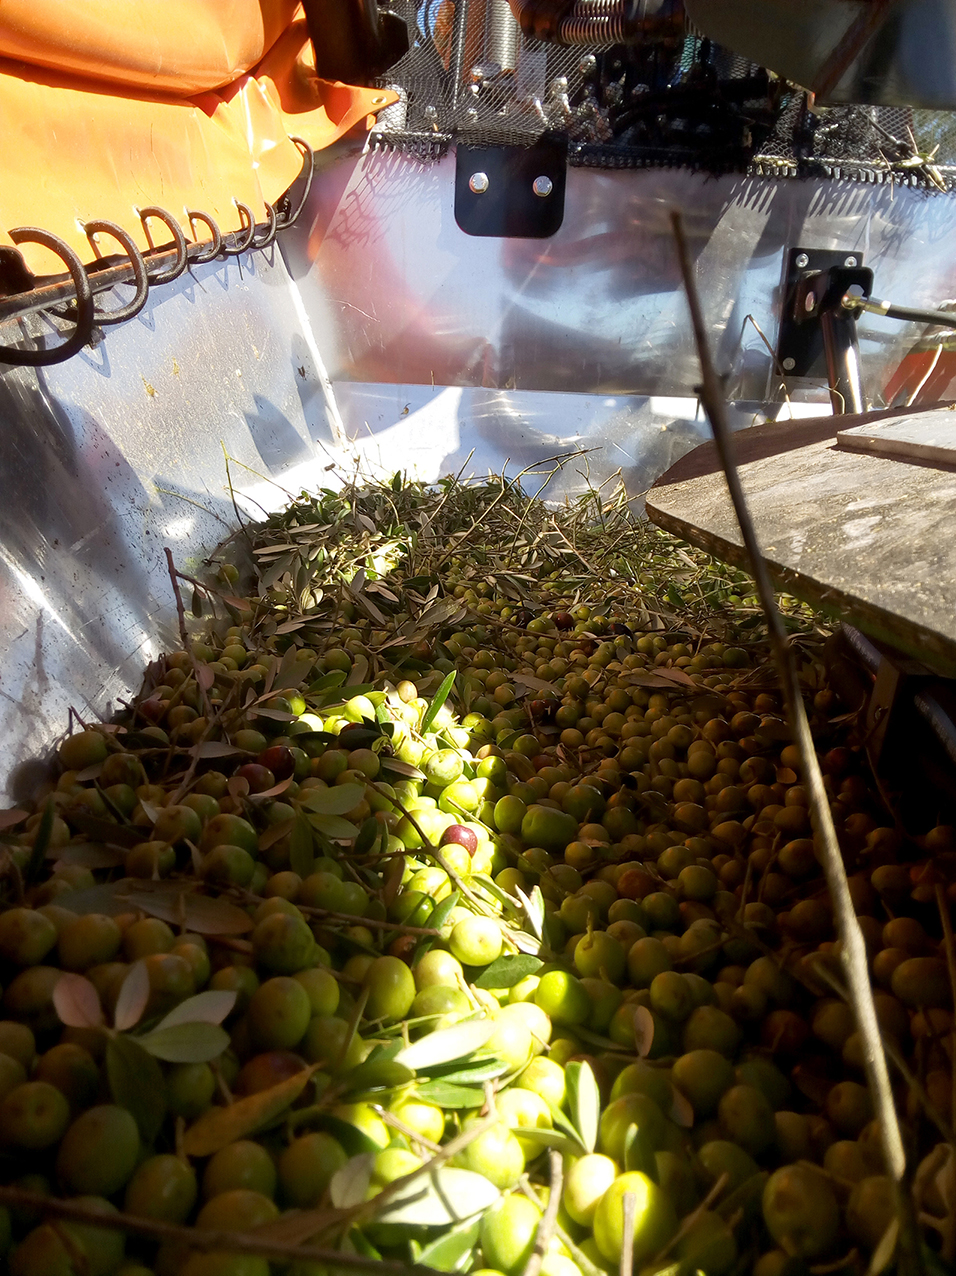 olives_and_dried_fruits_vibration_agromelca